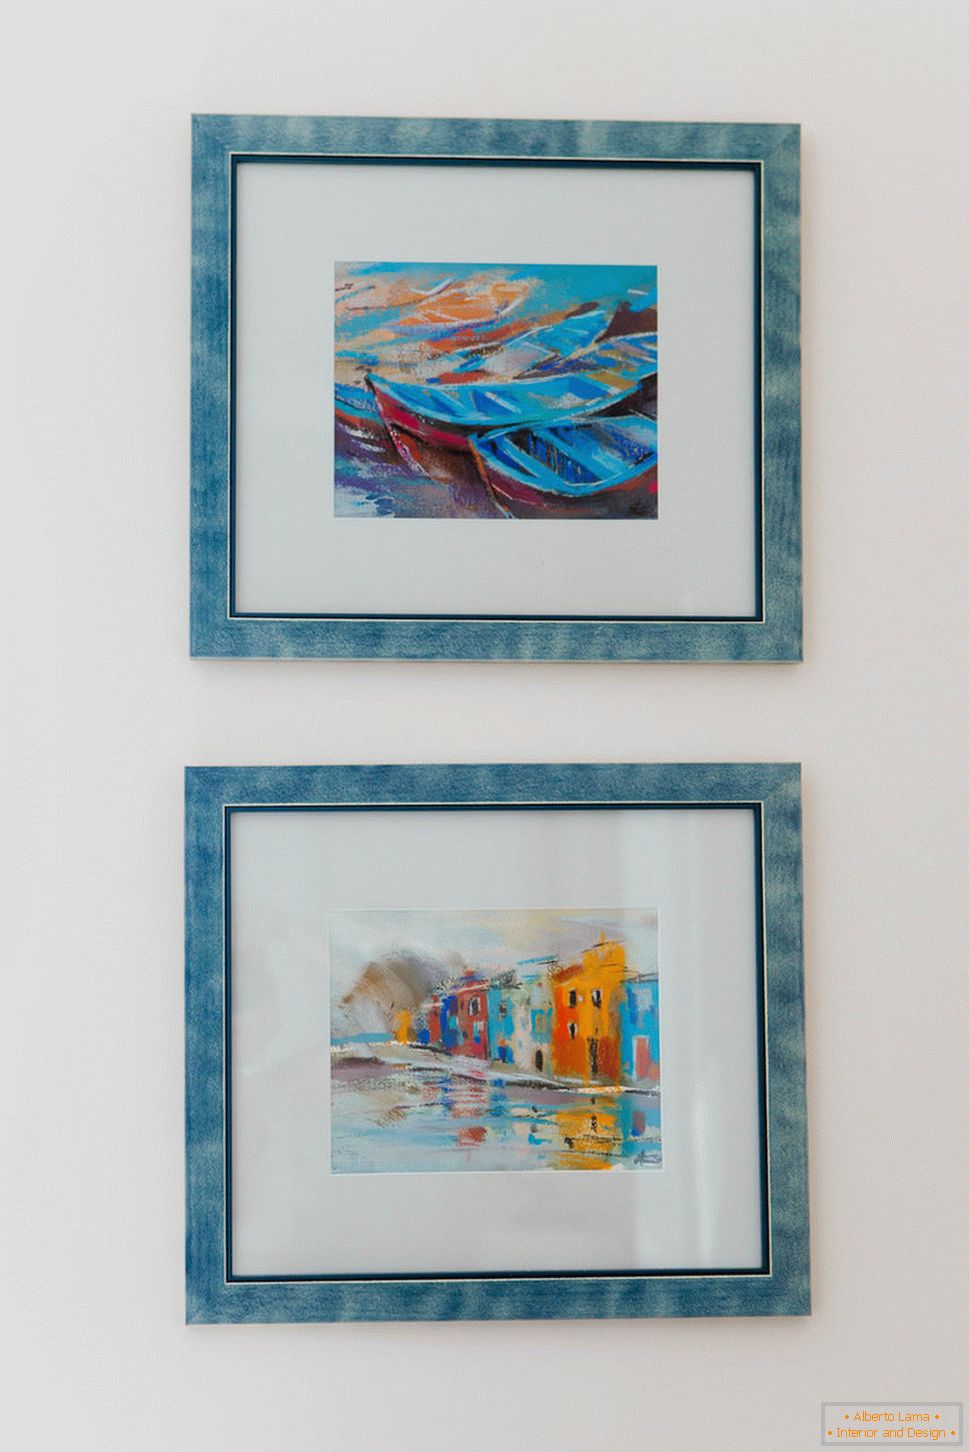 Paintings in the marine theme